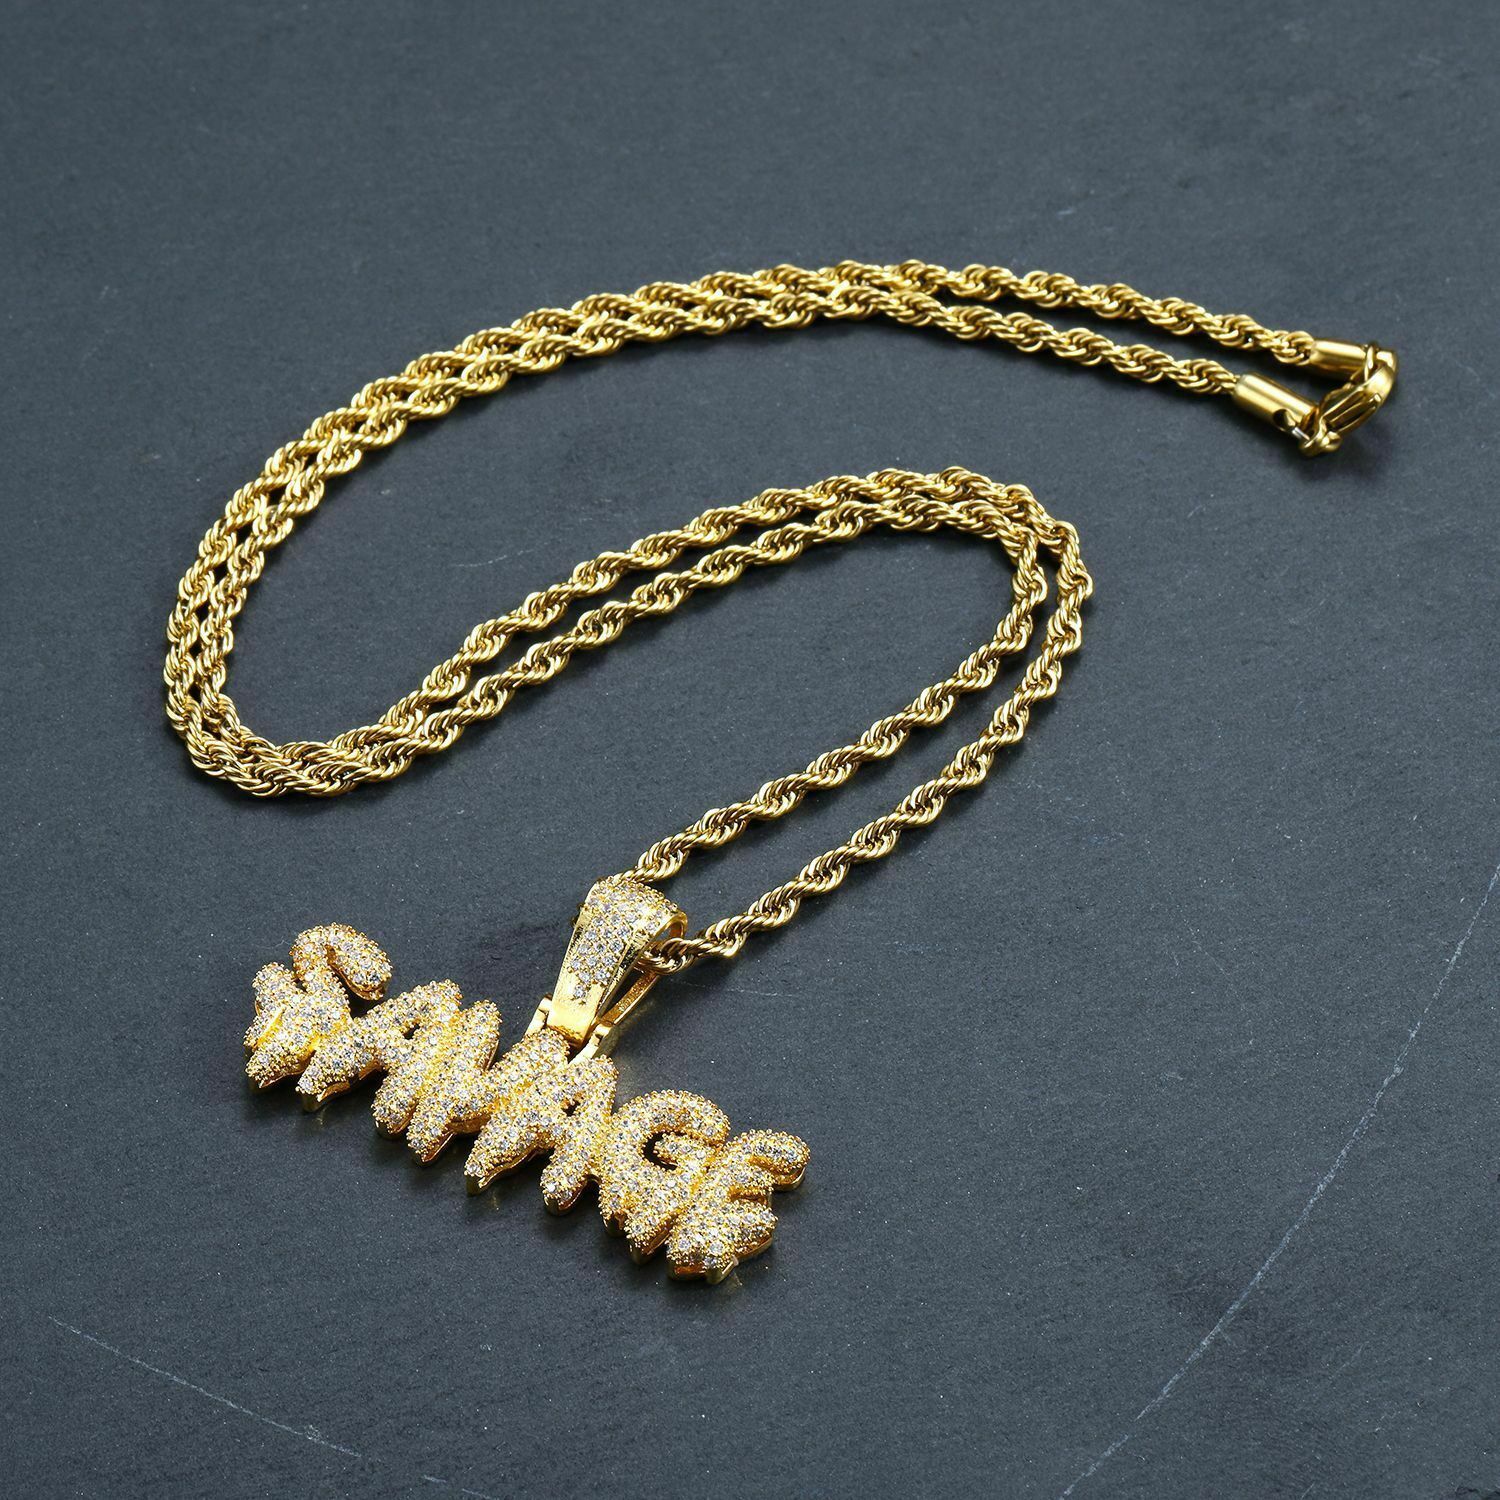 NEW SAVAGE PENDANT WITH VARIOUS CUBAN CHAIN HIP HOP NECKLACE RC2755G ...